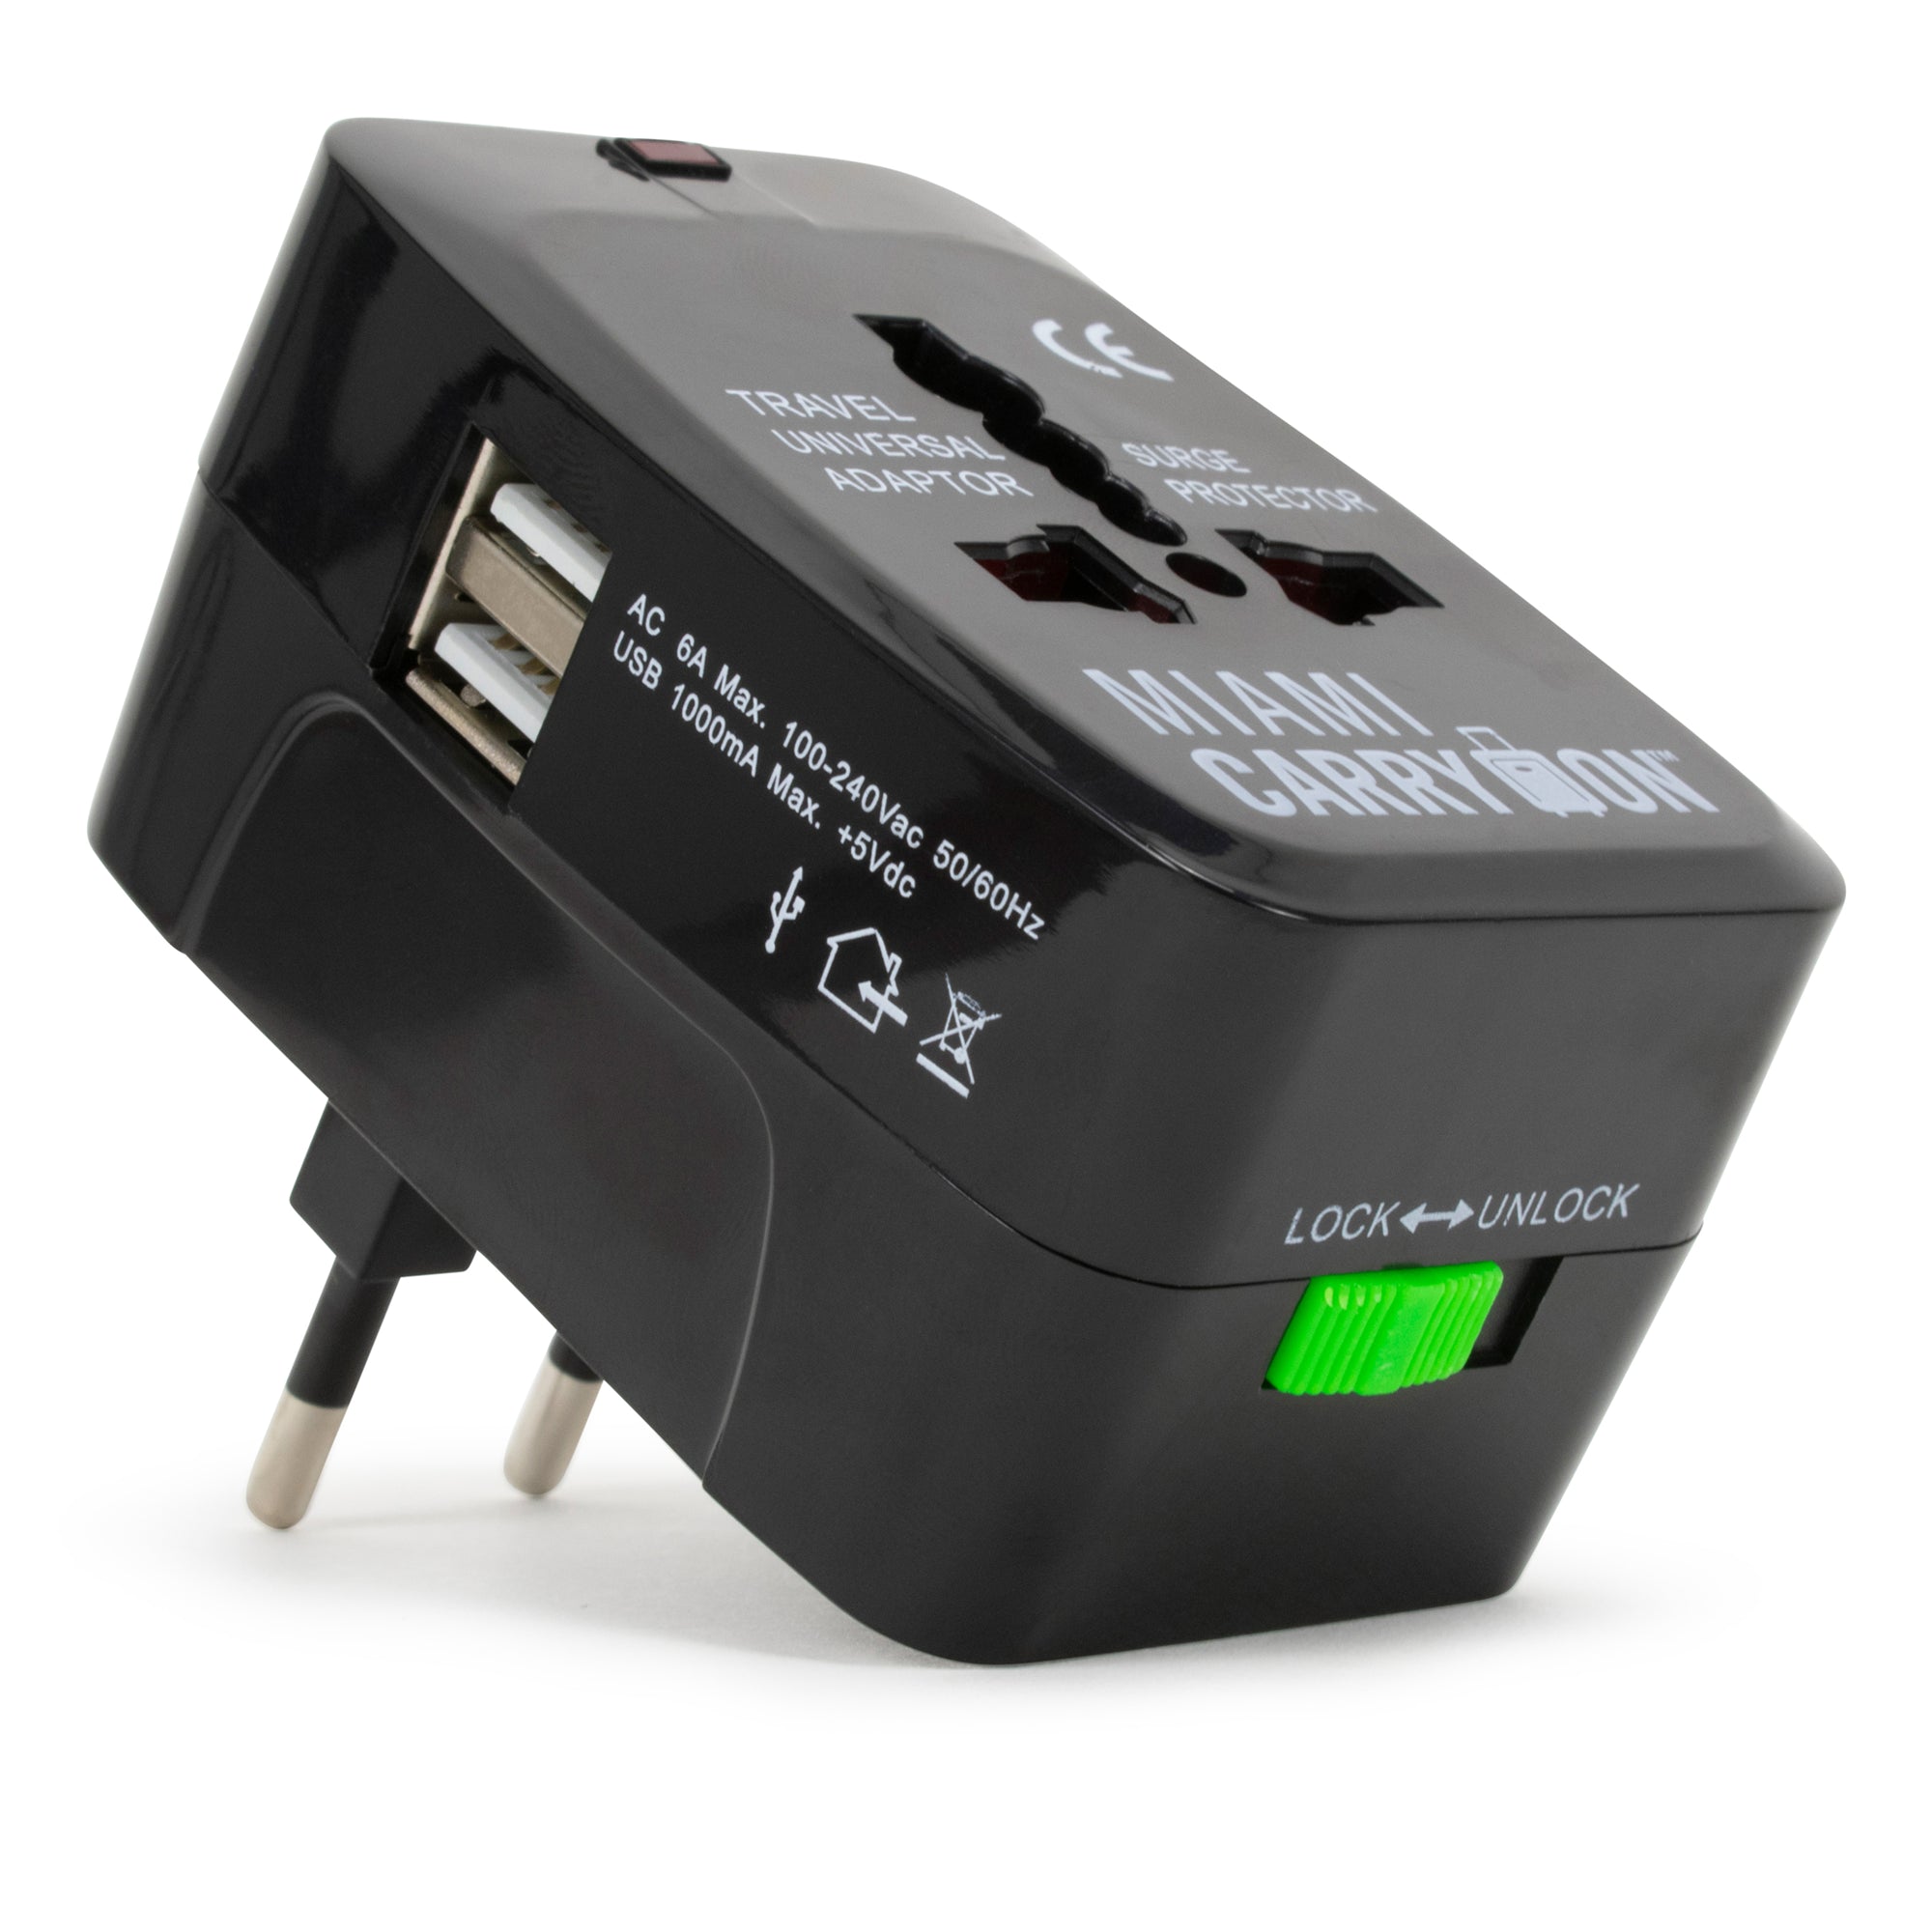 International Travel Adapter with USB Ports